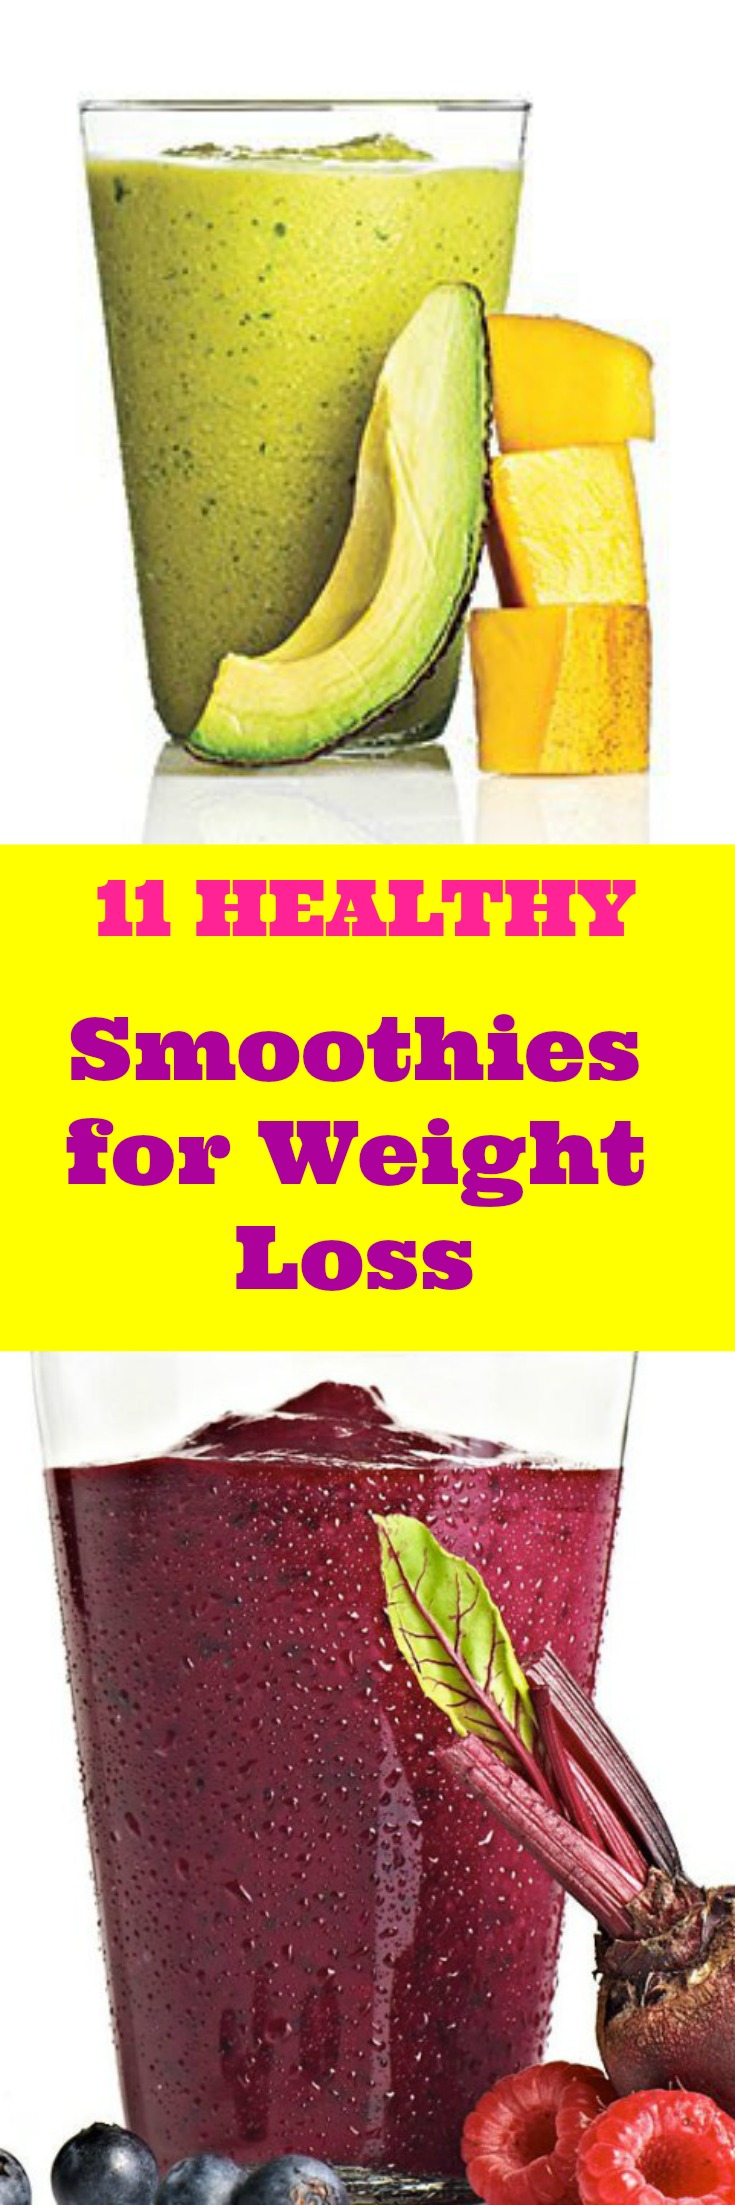 Make a head healthy breakfast smoothie for weight loss. High protien detox recipes for a healthy breakfast.